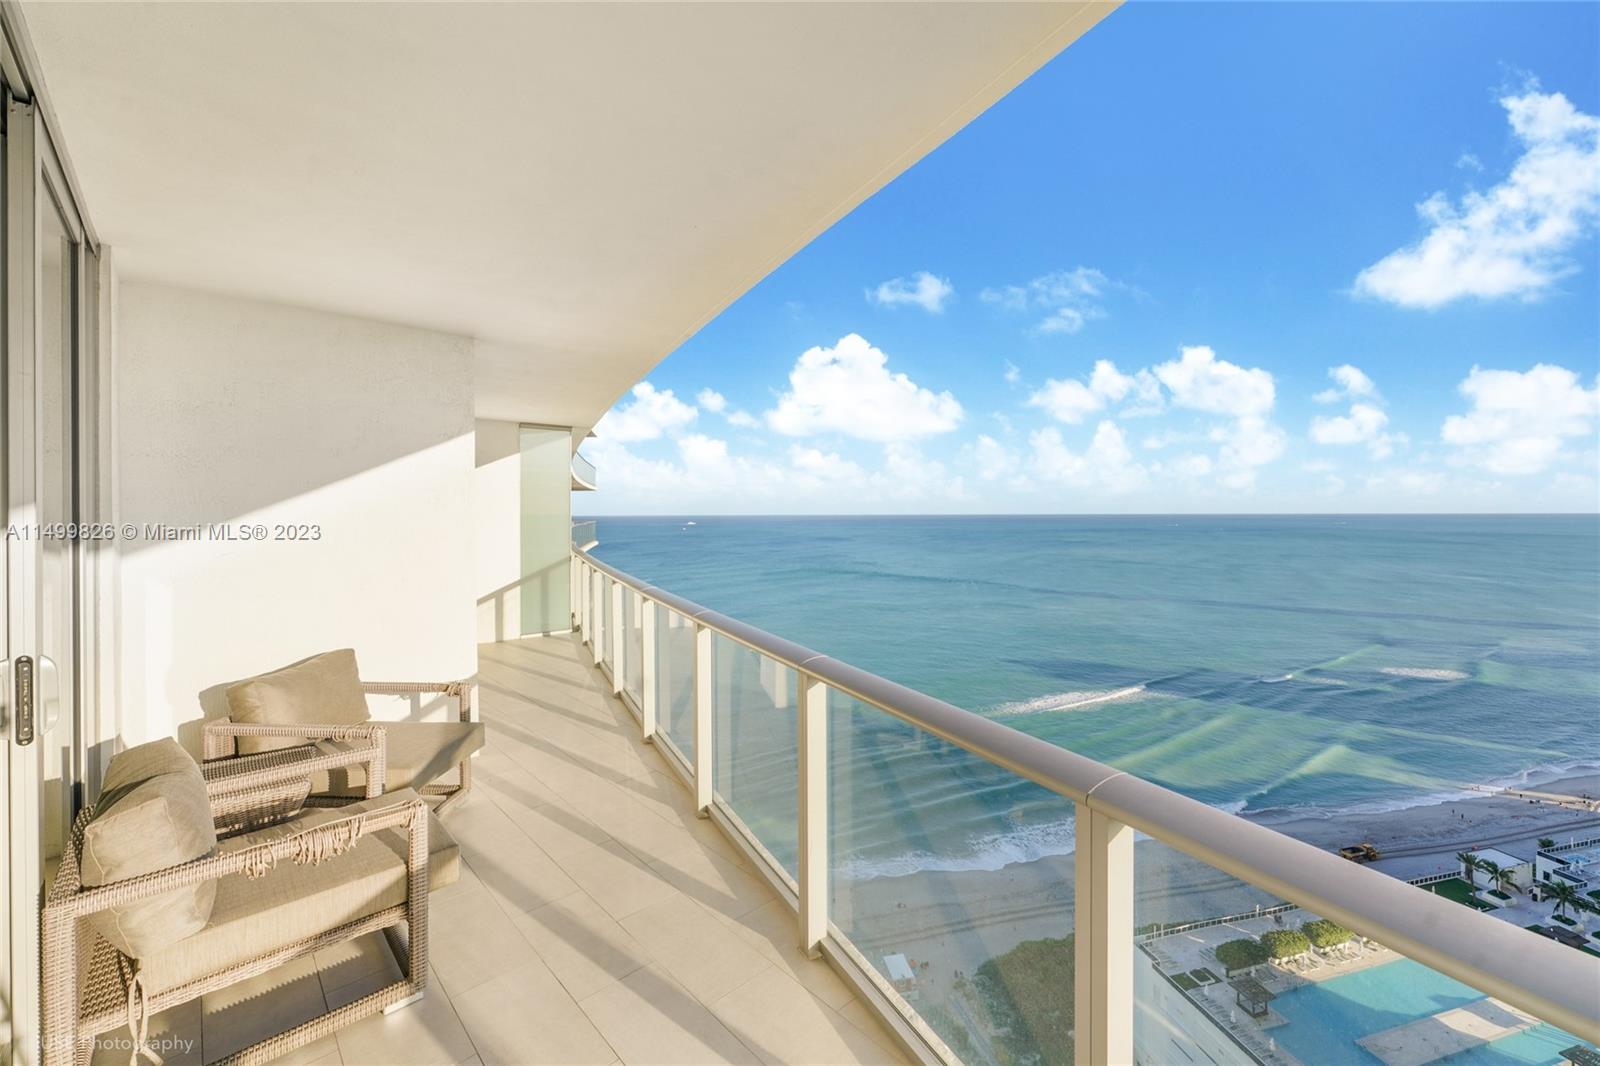 Photo of 4111 S Ocean Dr #2605 in Hollywood, FL